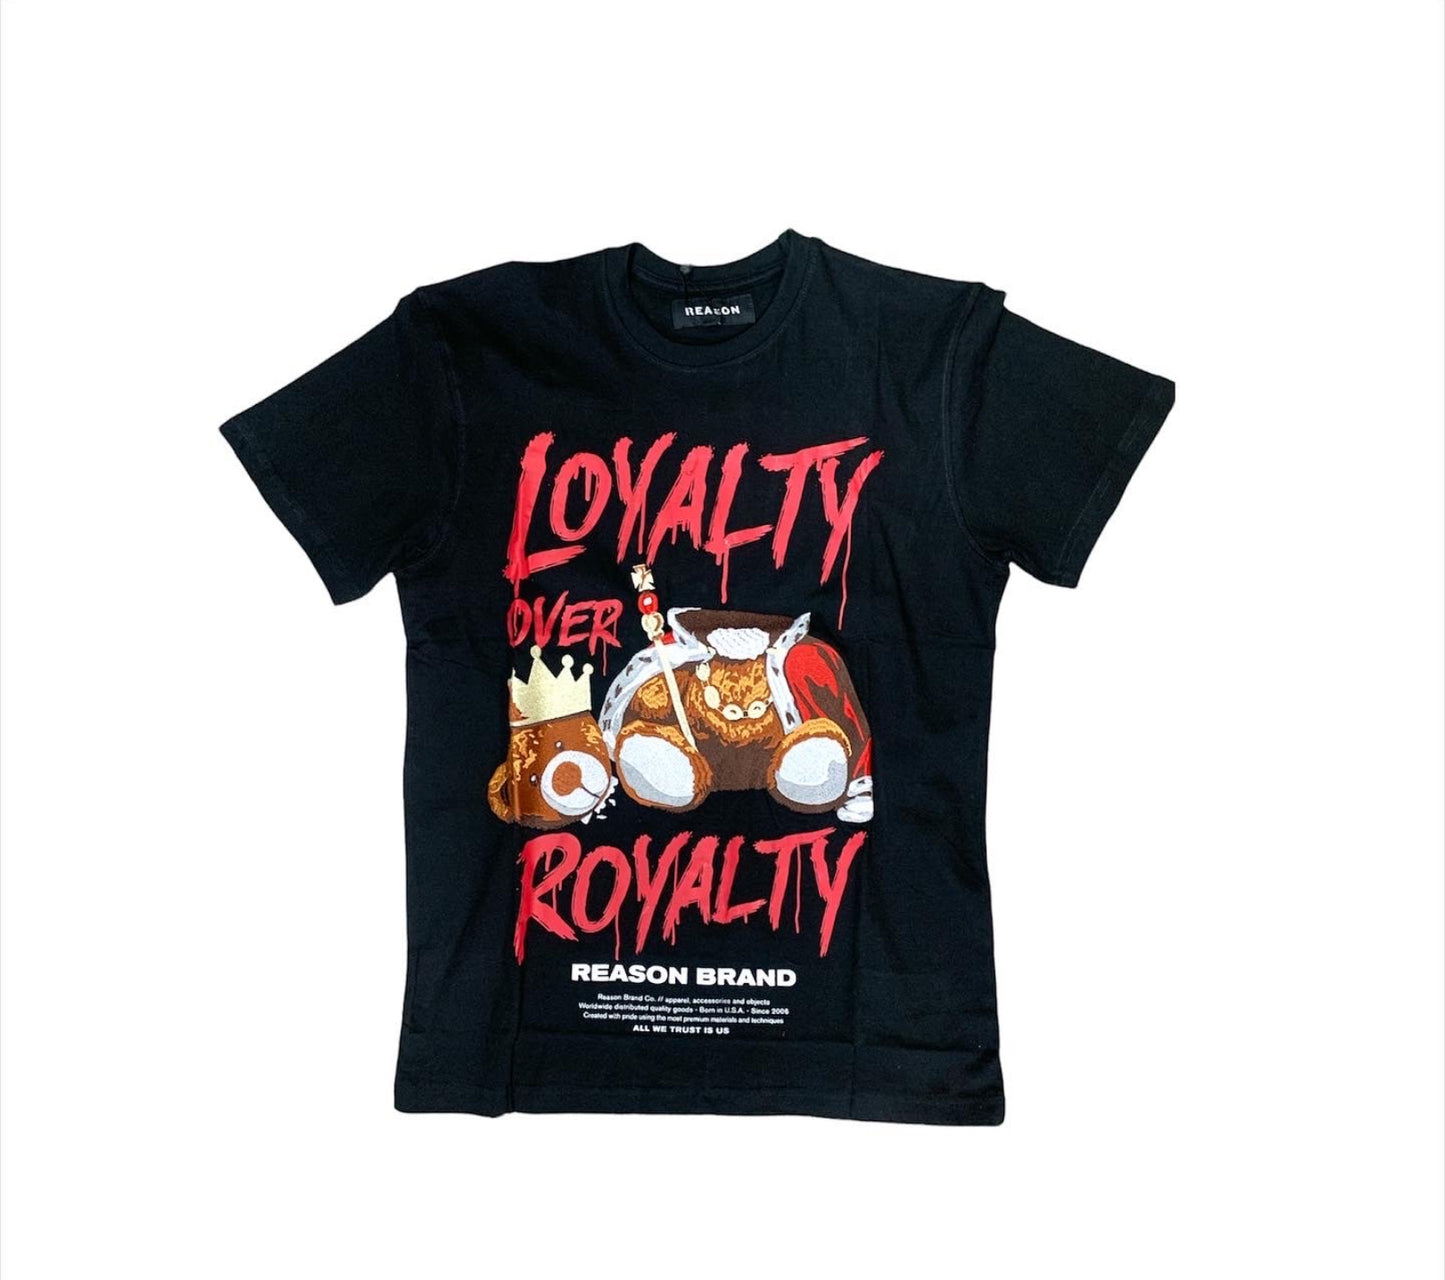 Loyalty over royalty